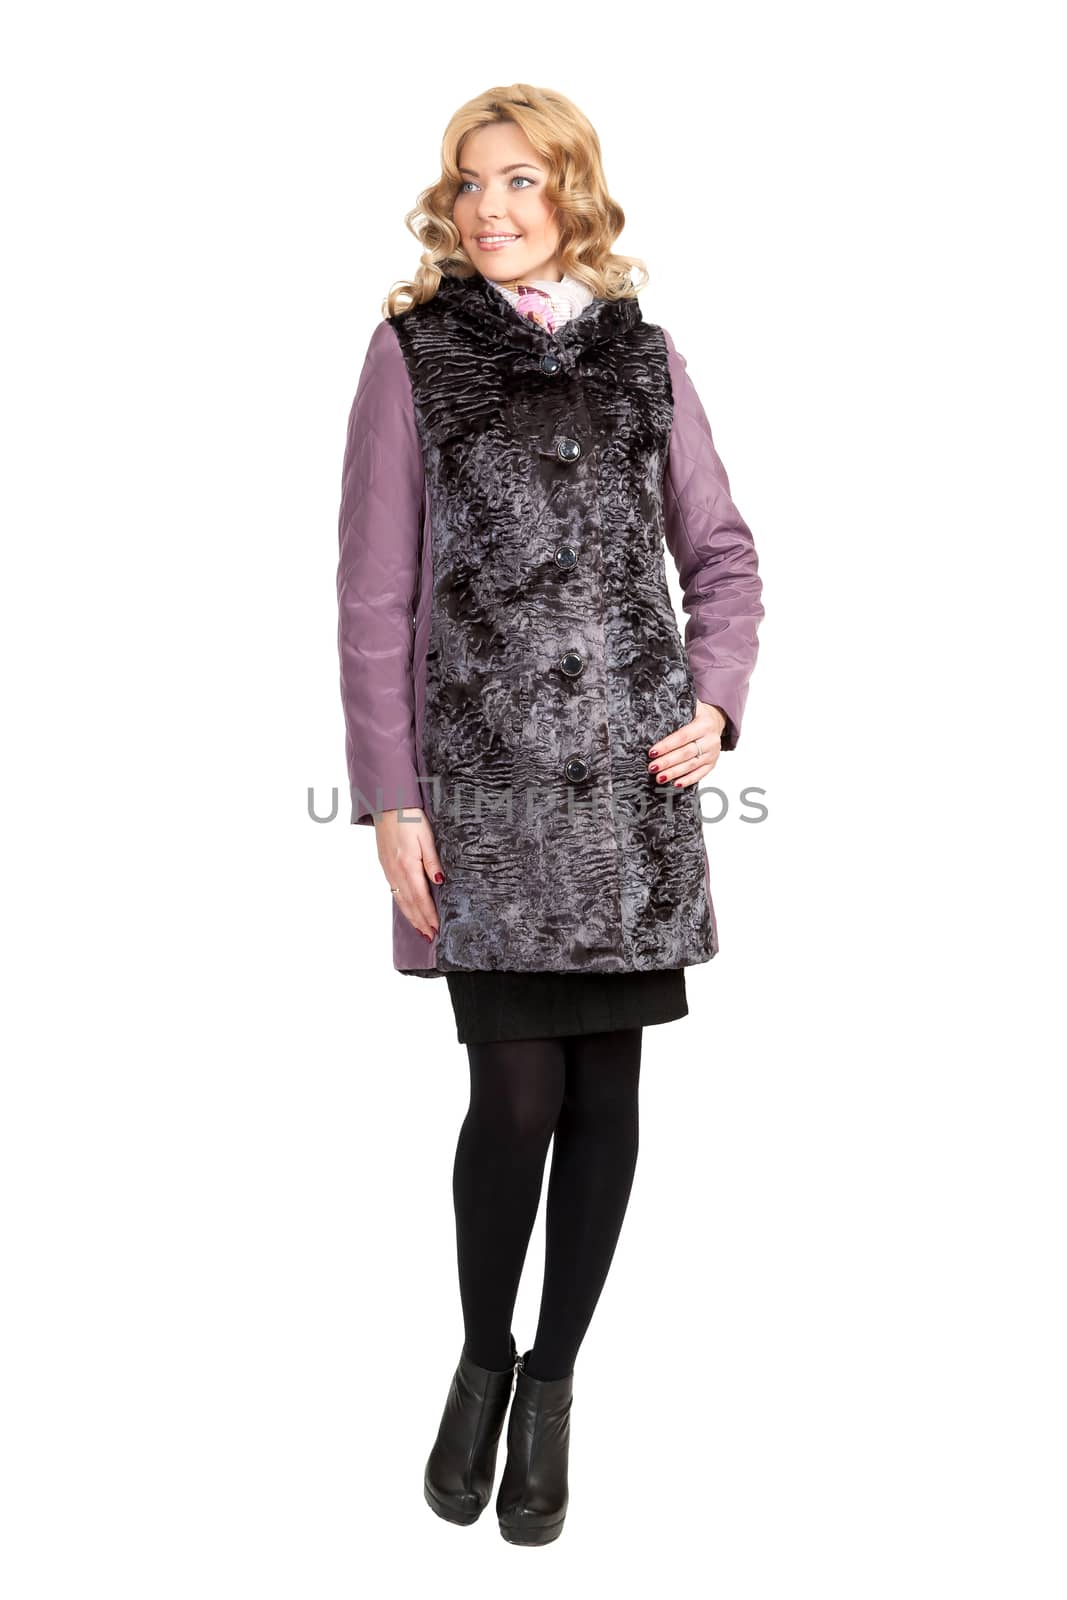 The girl in a violet  autumn coat on a white background